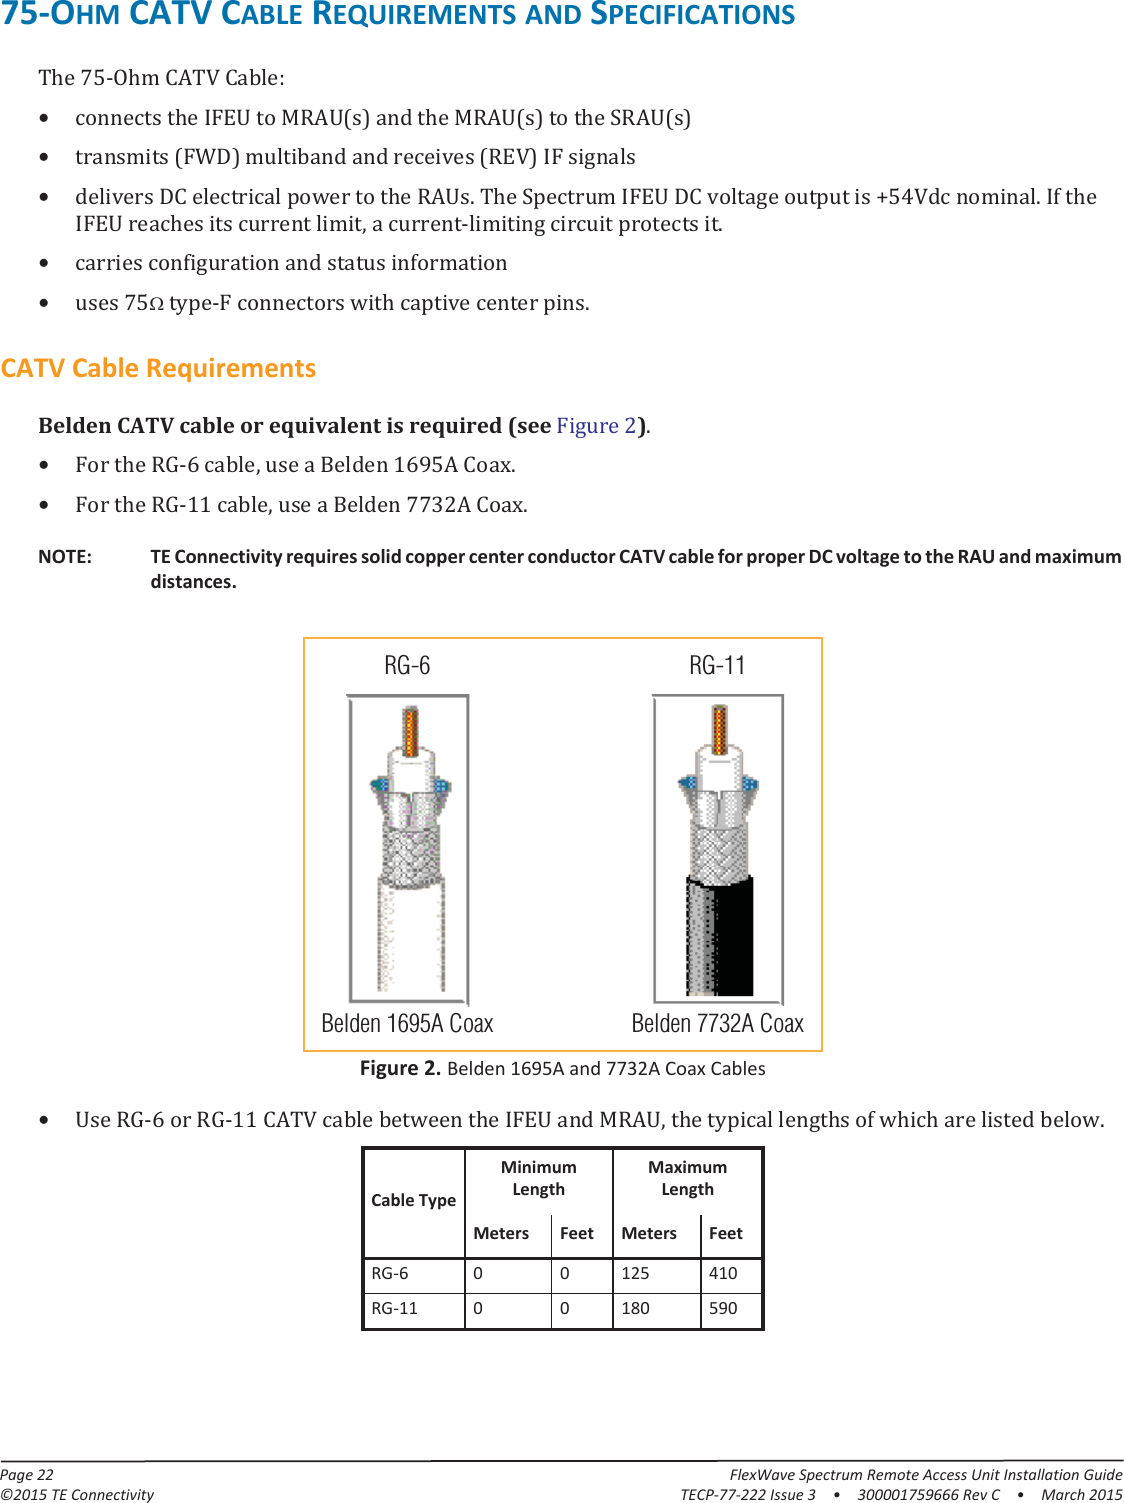 Page 22 FlexWave Spectrum Remote Access Unit Installation Guide©2015 TE Connectivity TECP-77-222 Issue 3  •  300001759666 Rev C  • March 201575-OHM CATV CABLE REQUIREMENTS AND SPECIFICATIONSThe 75-Ohm CATV Cable:•connects the IFEU to MRAU(s) and the MRAU(s) to the SRAU(s)•transmits (FWD) multiband and receives (REV) IF signals•delivers DC electrical power to the RAUs. The Spectrum IFEU DC voltage output is +54Vdc nominal. If the IFEU reaches its current limit, a current-limiting circuit protects it.•carries configuration and status information•uses 75 type-F connectors with captive center pins.CATV Cable RequirementsBelden CATV cable or equivalent is required (see Figure  2).•For the RG-6 cable, use a Belden 1695A Coax.•For the RG-11 cable, use a Belden 7732A Coax.RG-11Belden 1695A CoaxRG-6Belden 7732A CoaxNOTE: TE Connectivity requires solid copper center conductor CATV cable for proper DC voltage to the RAU and maximum distances.Figure 2. Belden 1695A and 7732A Coax Cables•Use RG-6 or RG-11 CATV cable between the IFEU and MRAU, the typical lengths of which are listed below.Cable TypeMinimum LengthMaximum LengthMeters Feet Meters FeetRG-6 0 0 125 410RG-11 0 0 180 590